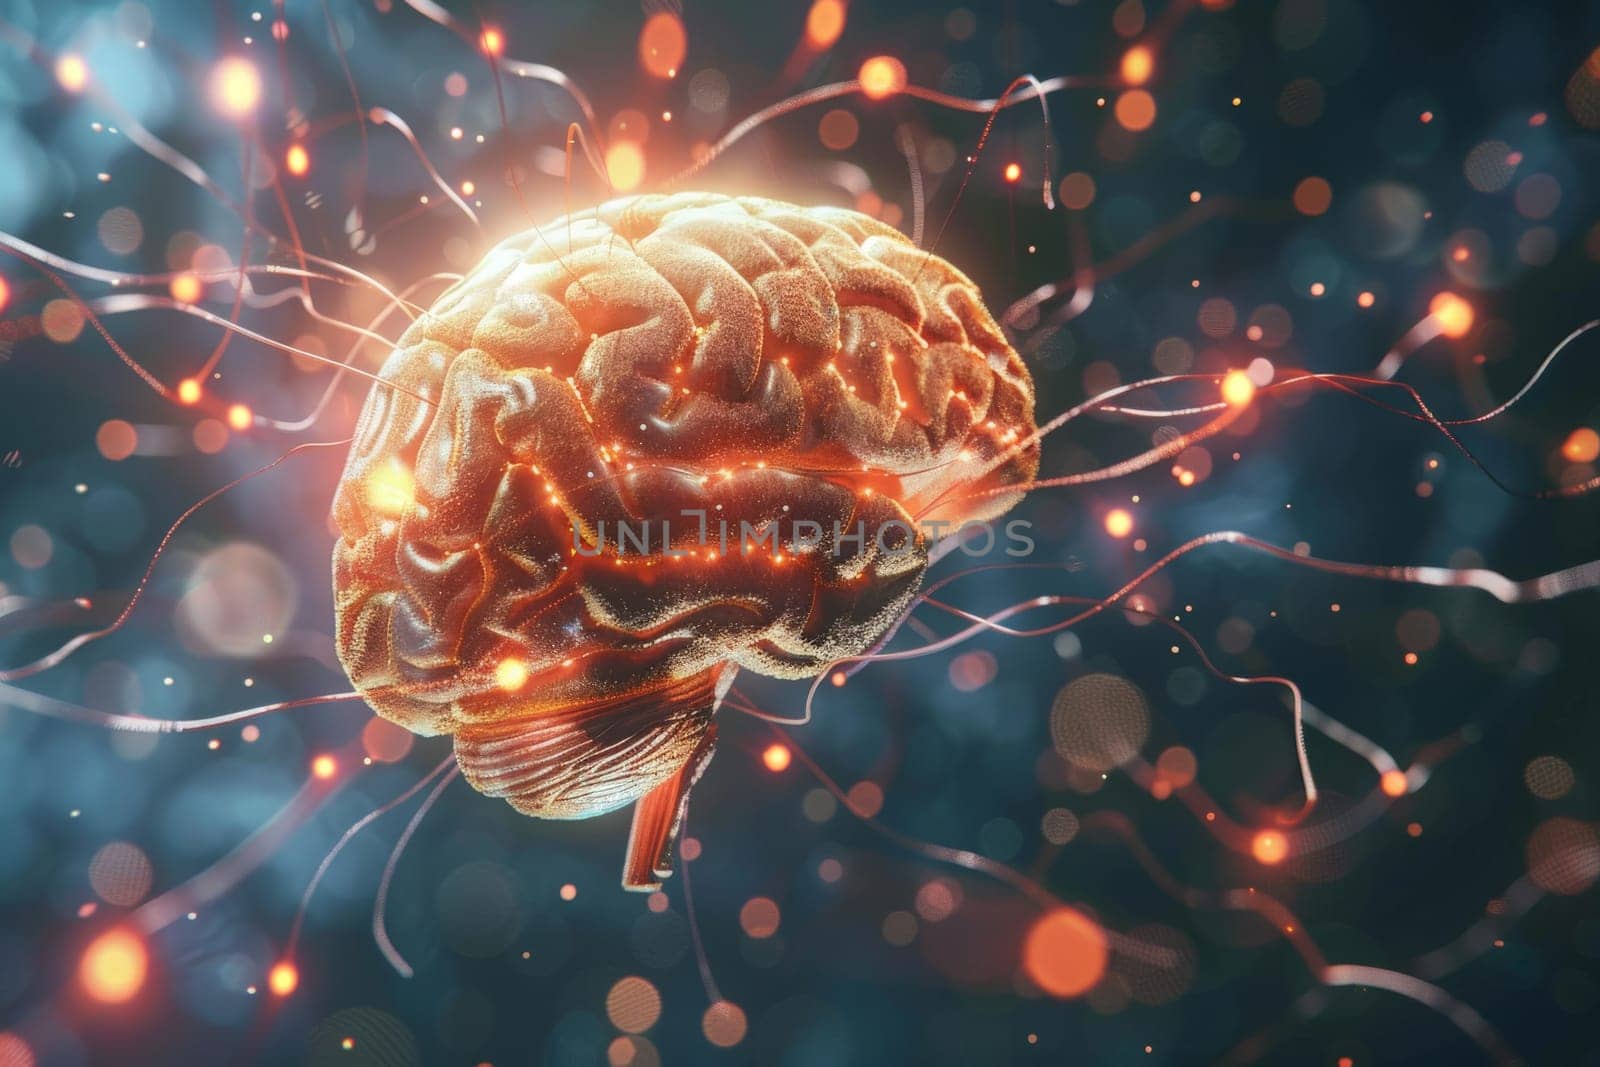 A brain with glowing red and orange strands coming out of it. The brain is surrounded by a blue background